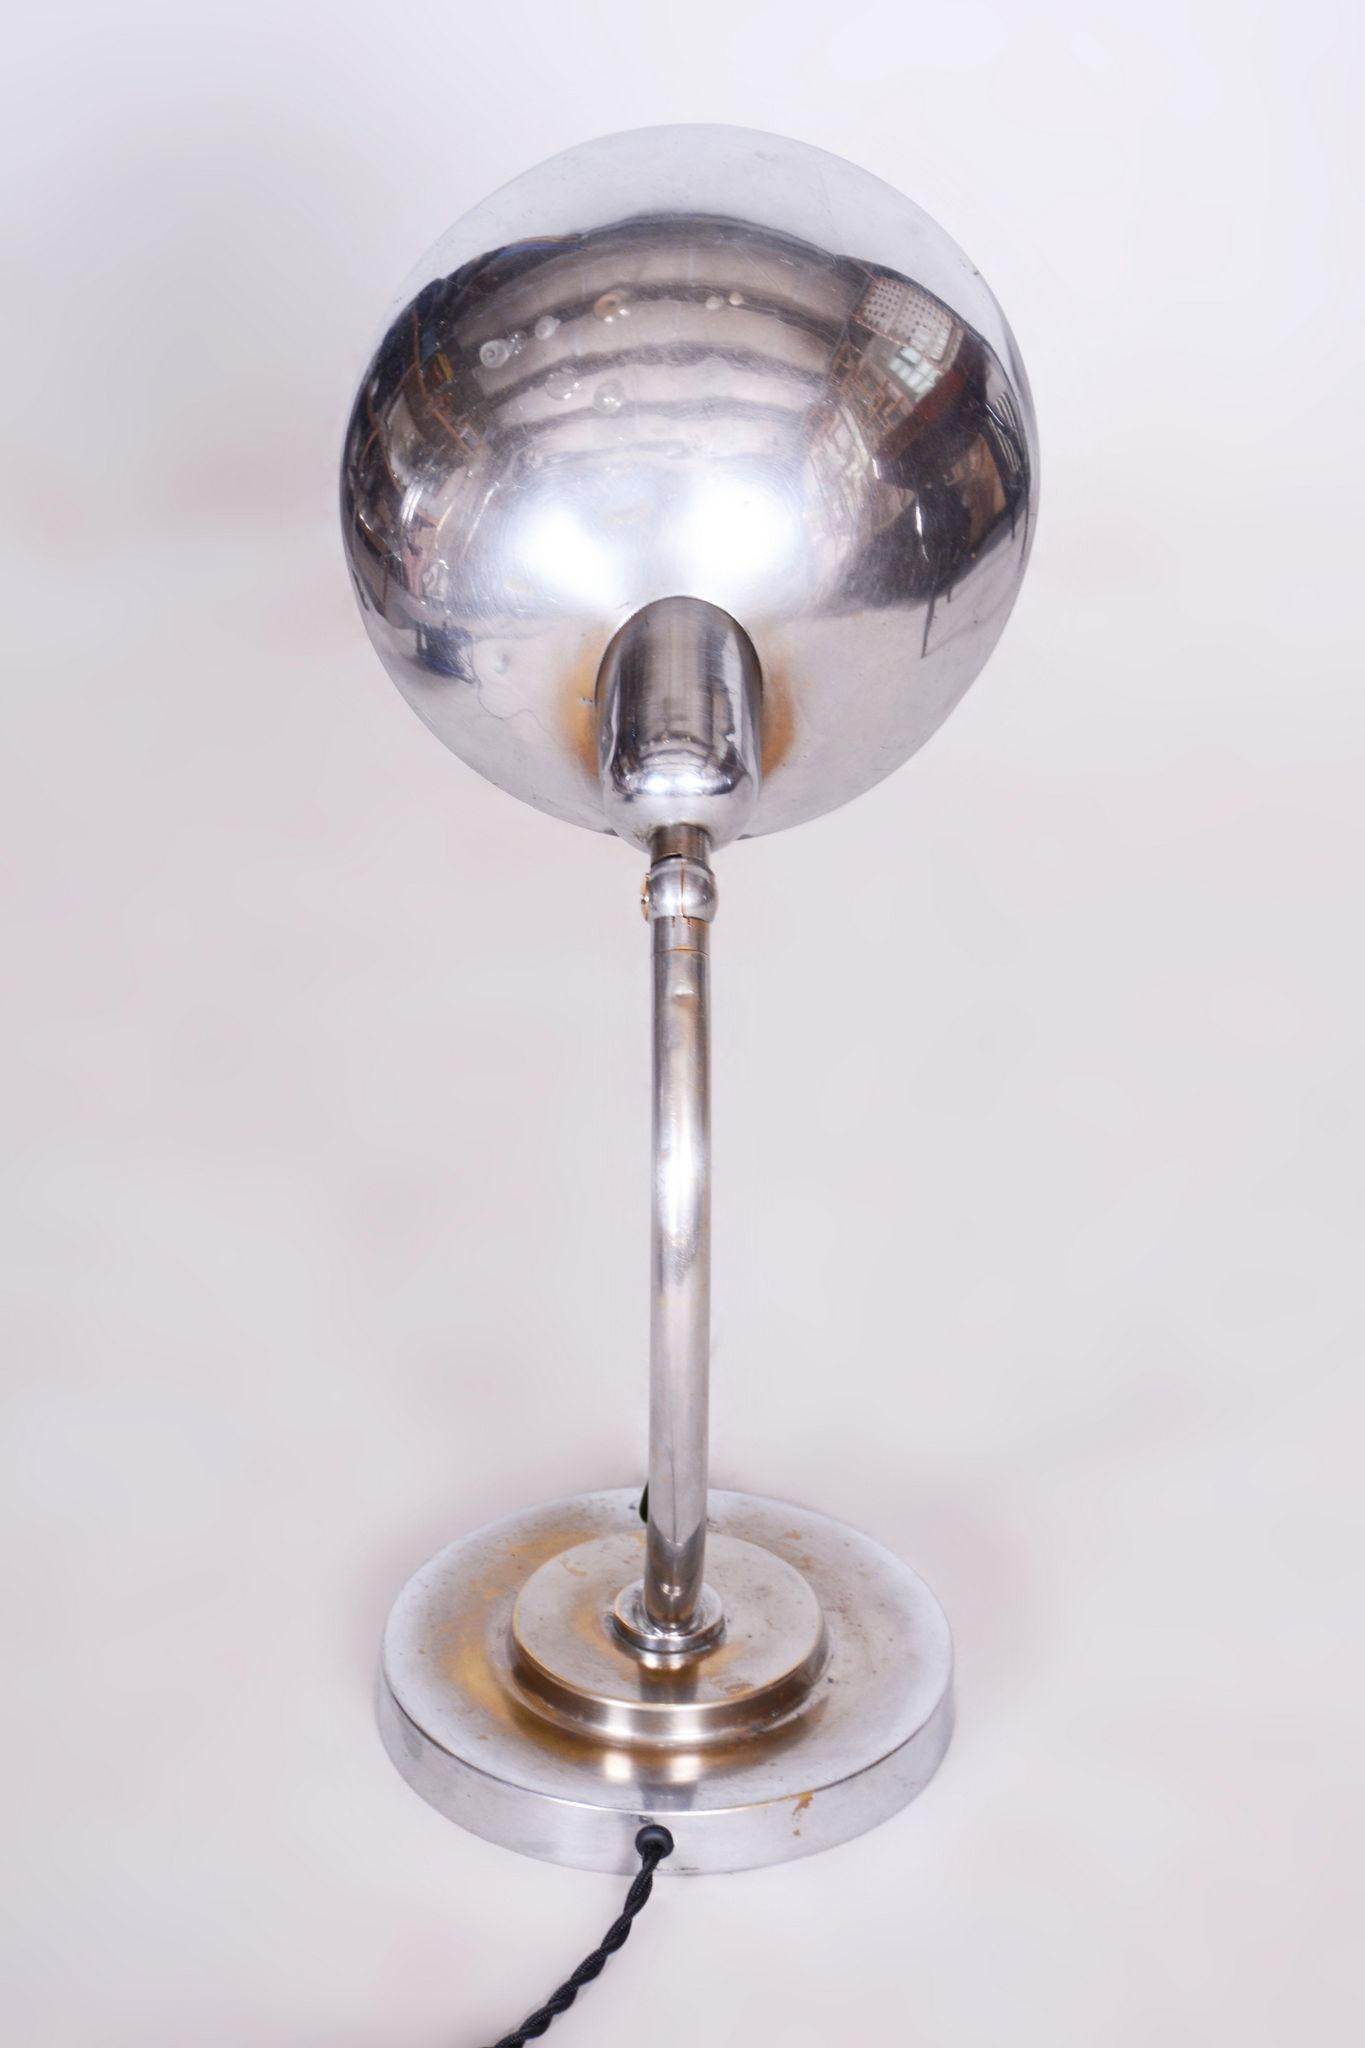 Restored Bauhaus Chrome Table Lamp, F. Anyz, New Electrification, Czechia, 1920s In Good Condition For Sale In Horomerice, CZ